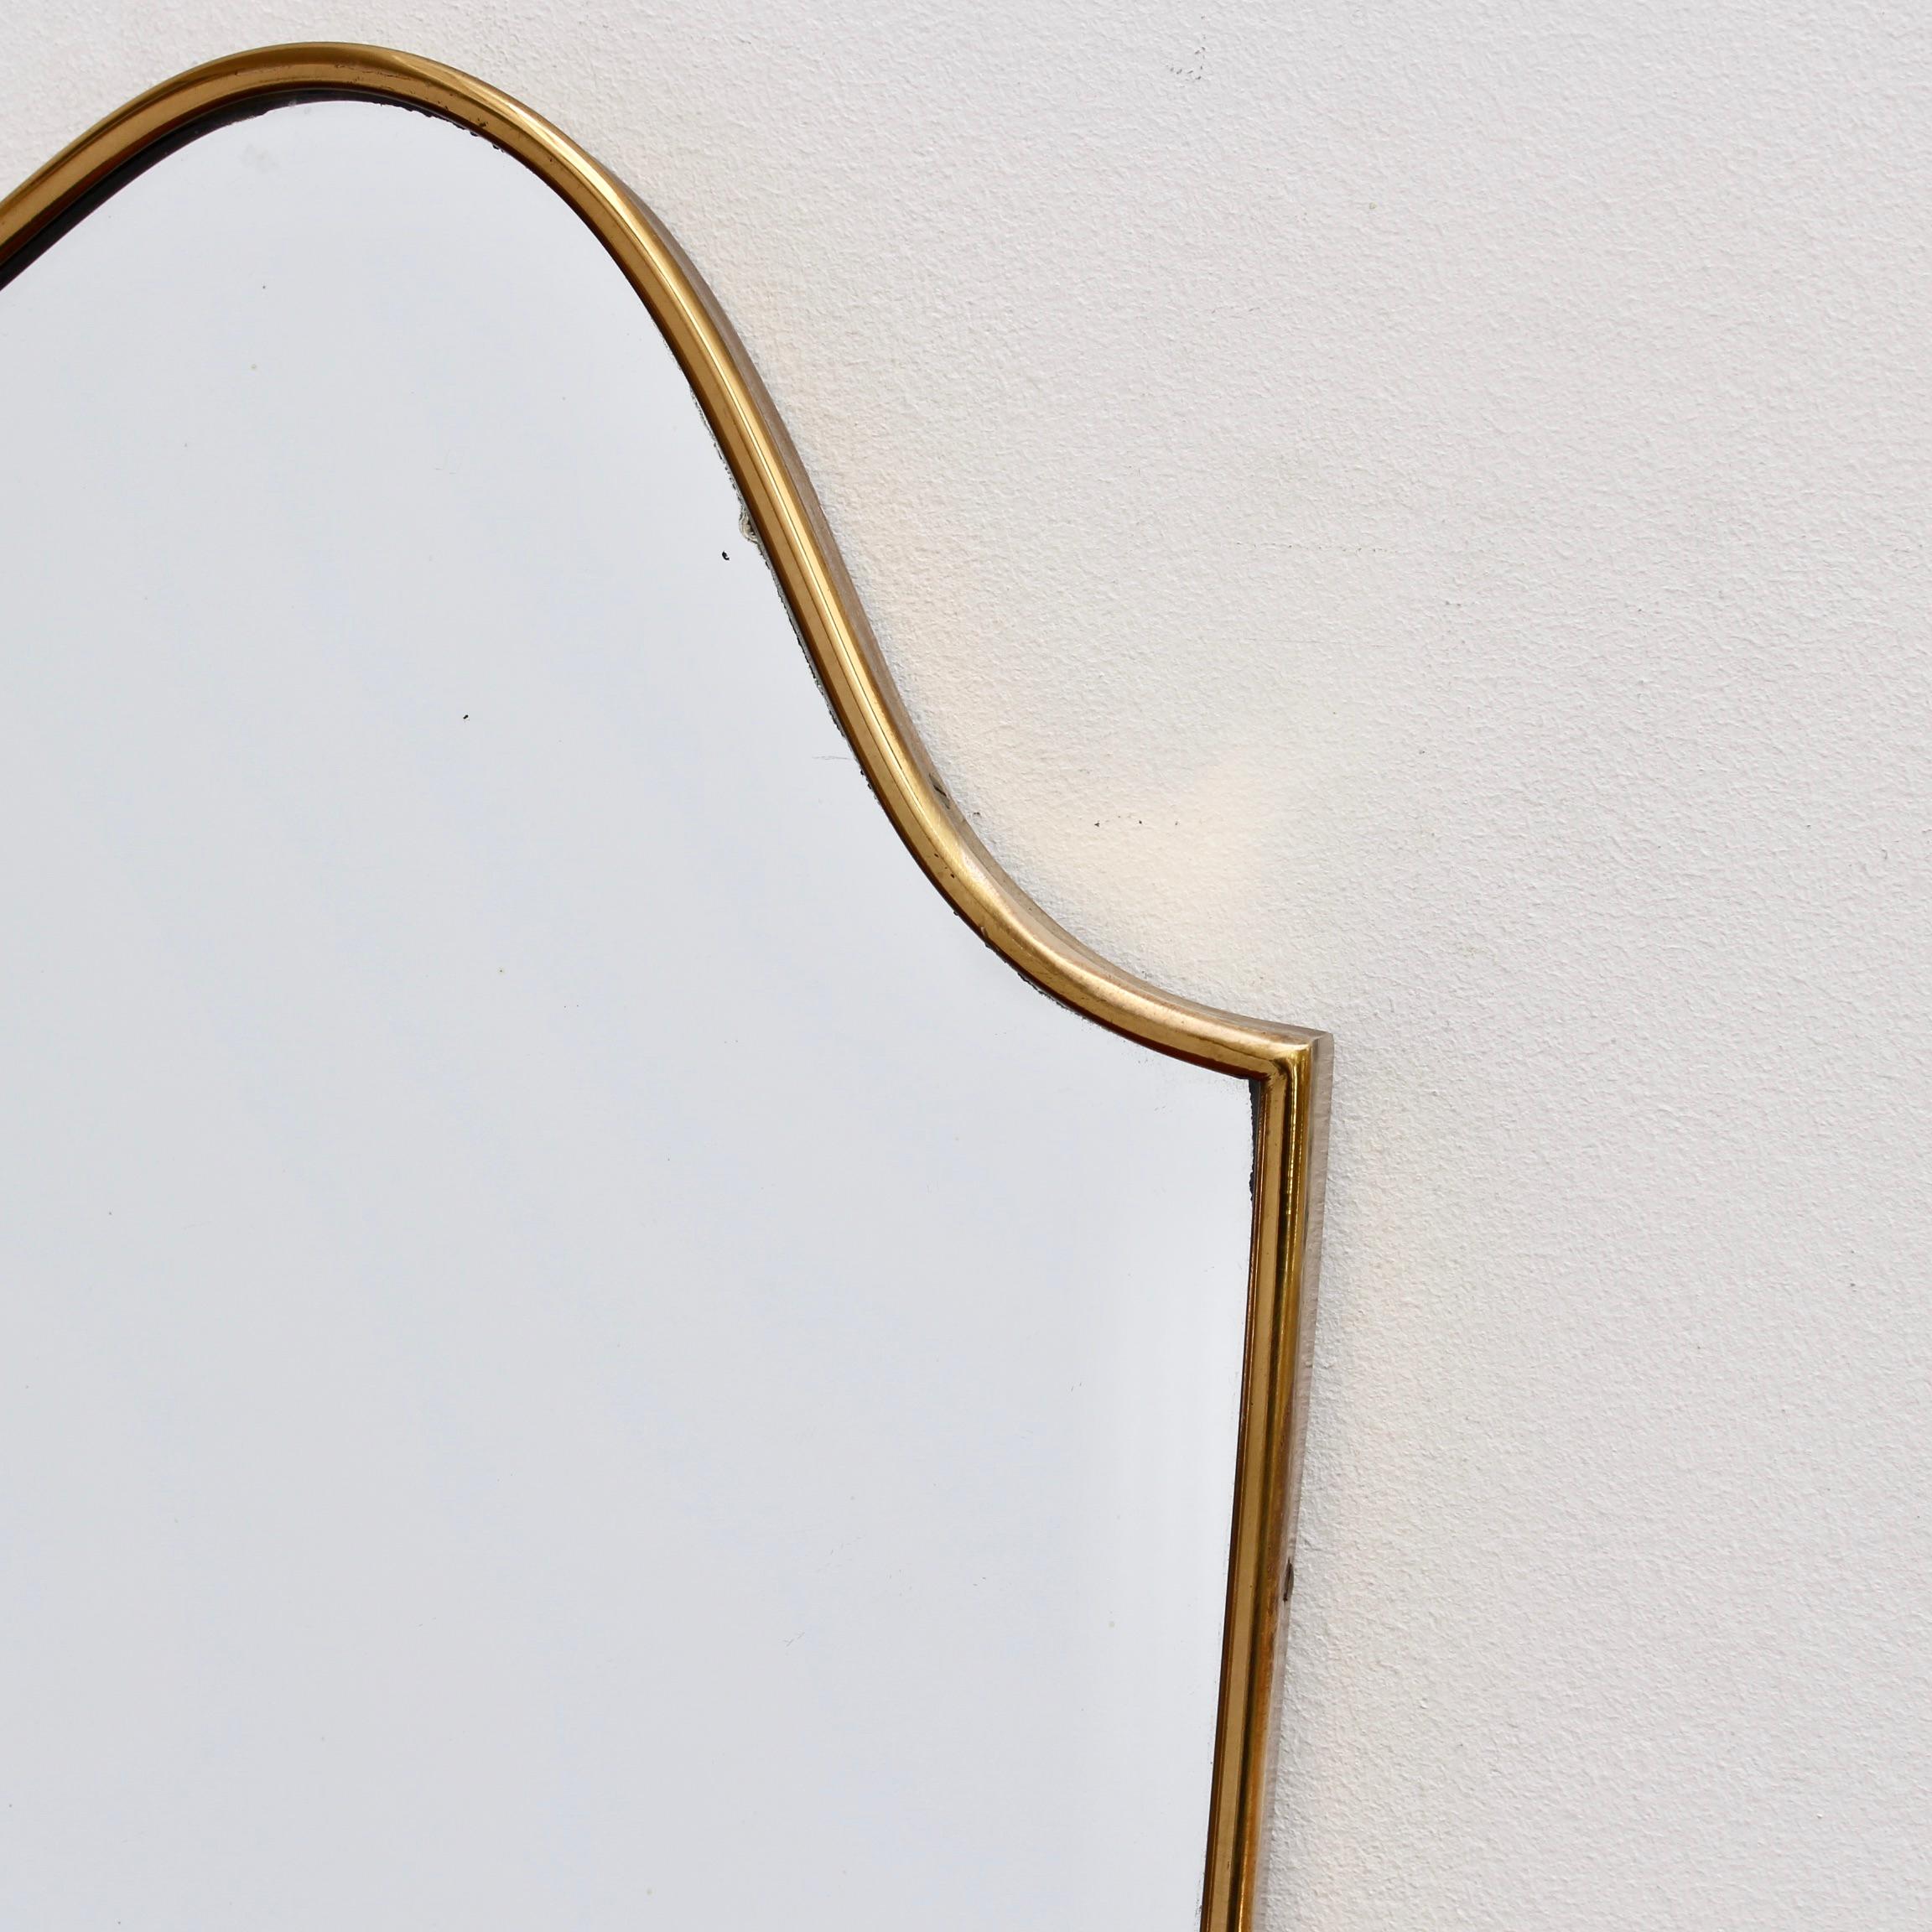 Midcentury Eared Crest-Shaped Italian Wall Mirror with Brass Frame, circa 1950s 1